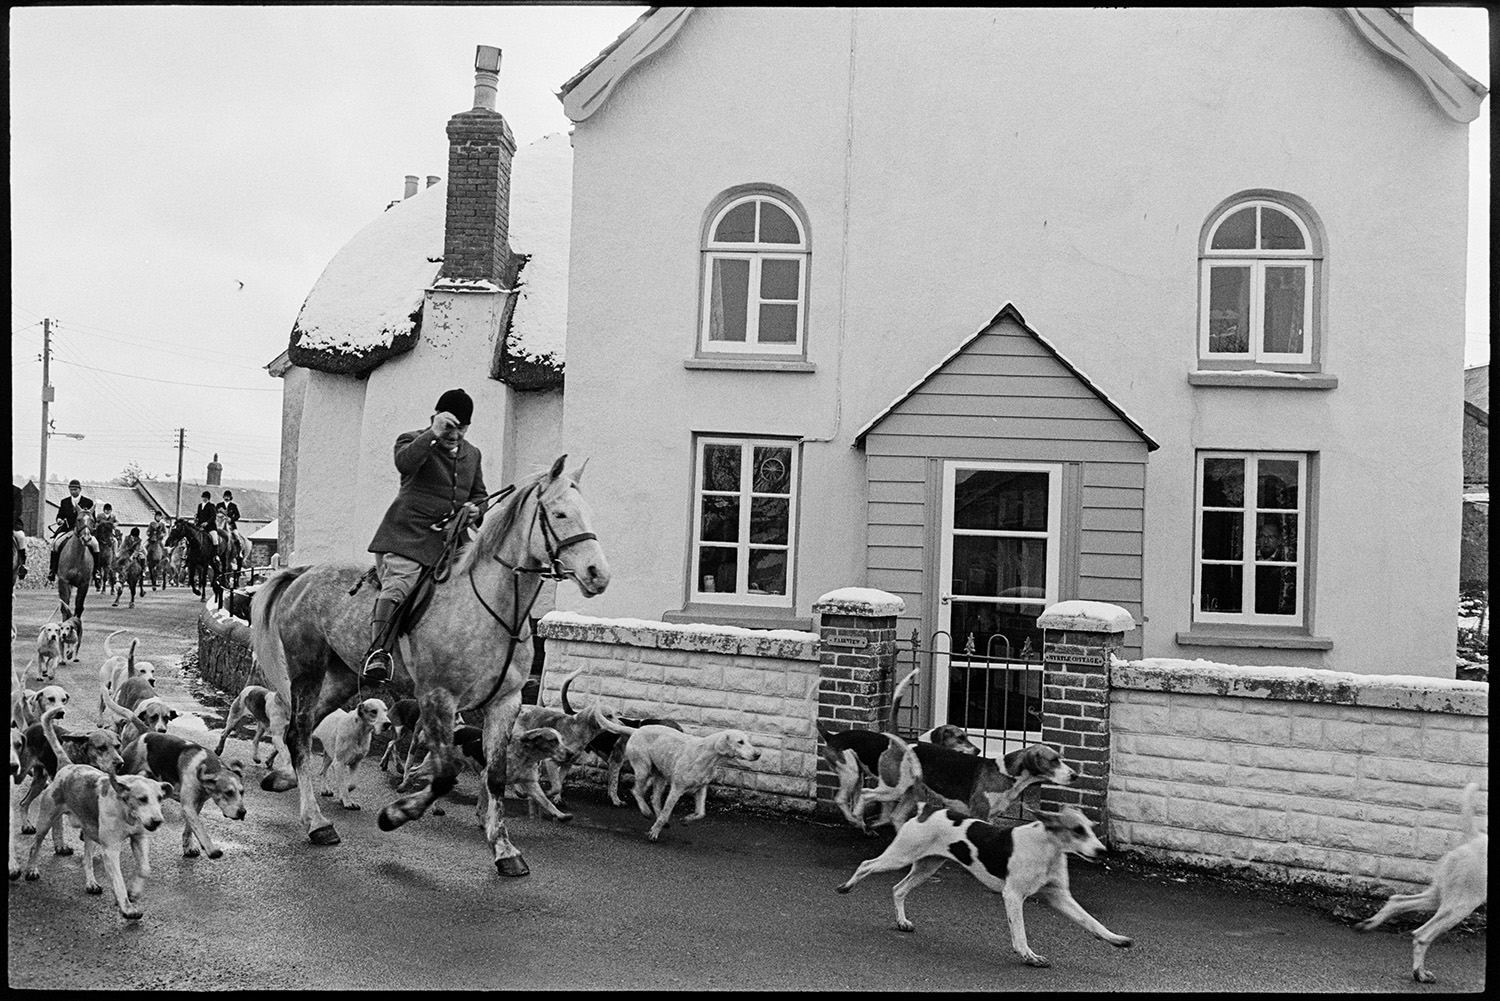 Hunt meet in village, setting off. 
[Huntsmen setting off on horseback, with hounds, through Dolton on a hunt. They are passing a house with a porch. A thatched cottage covered with snow can also be seen in the background.]